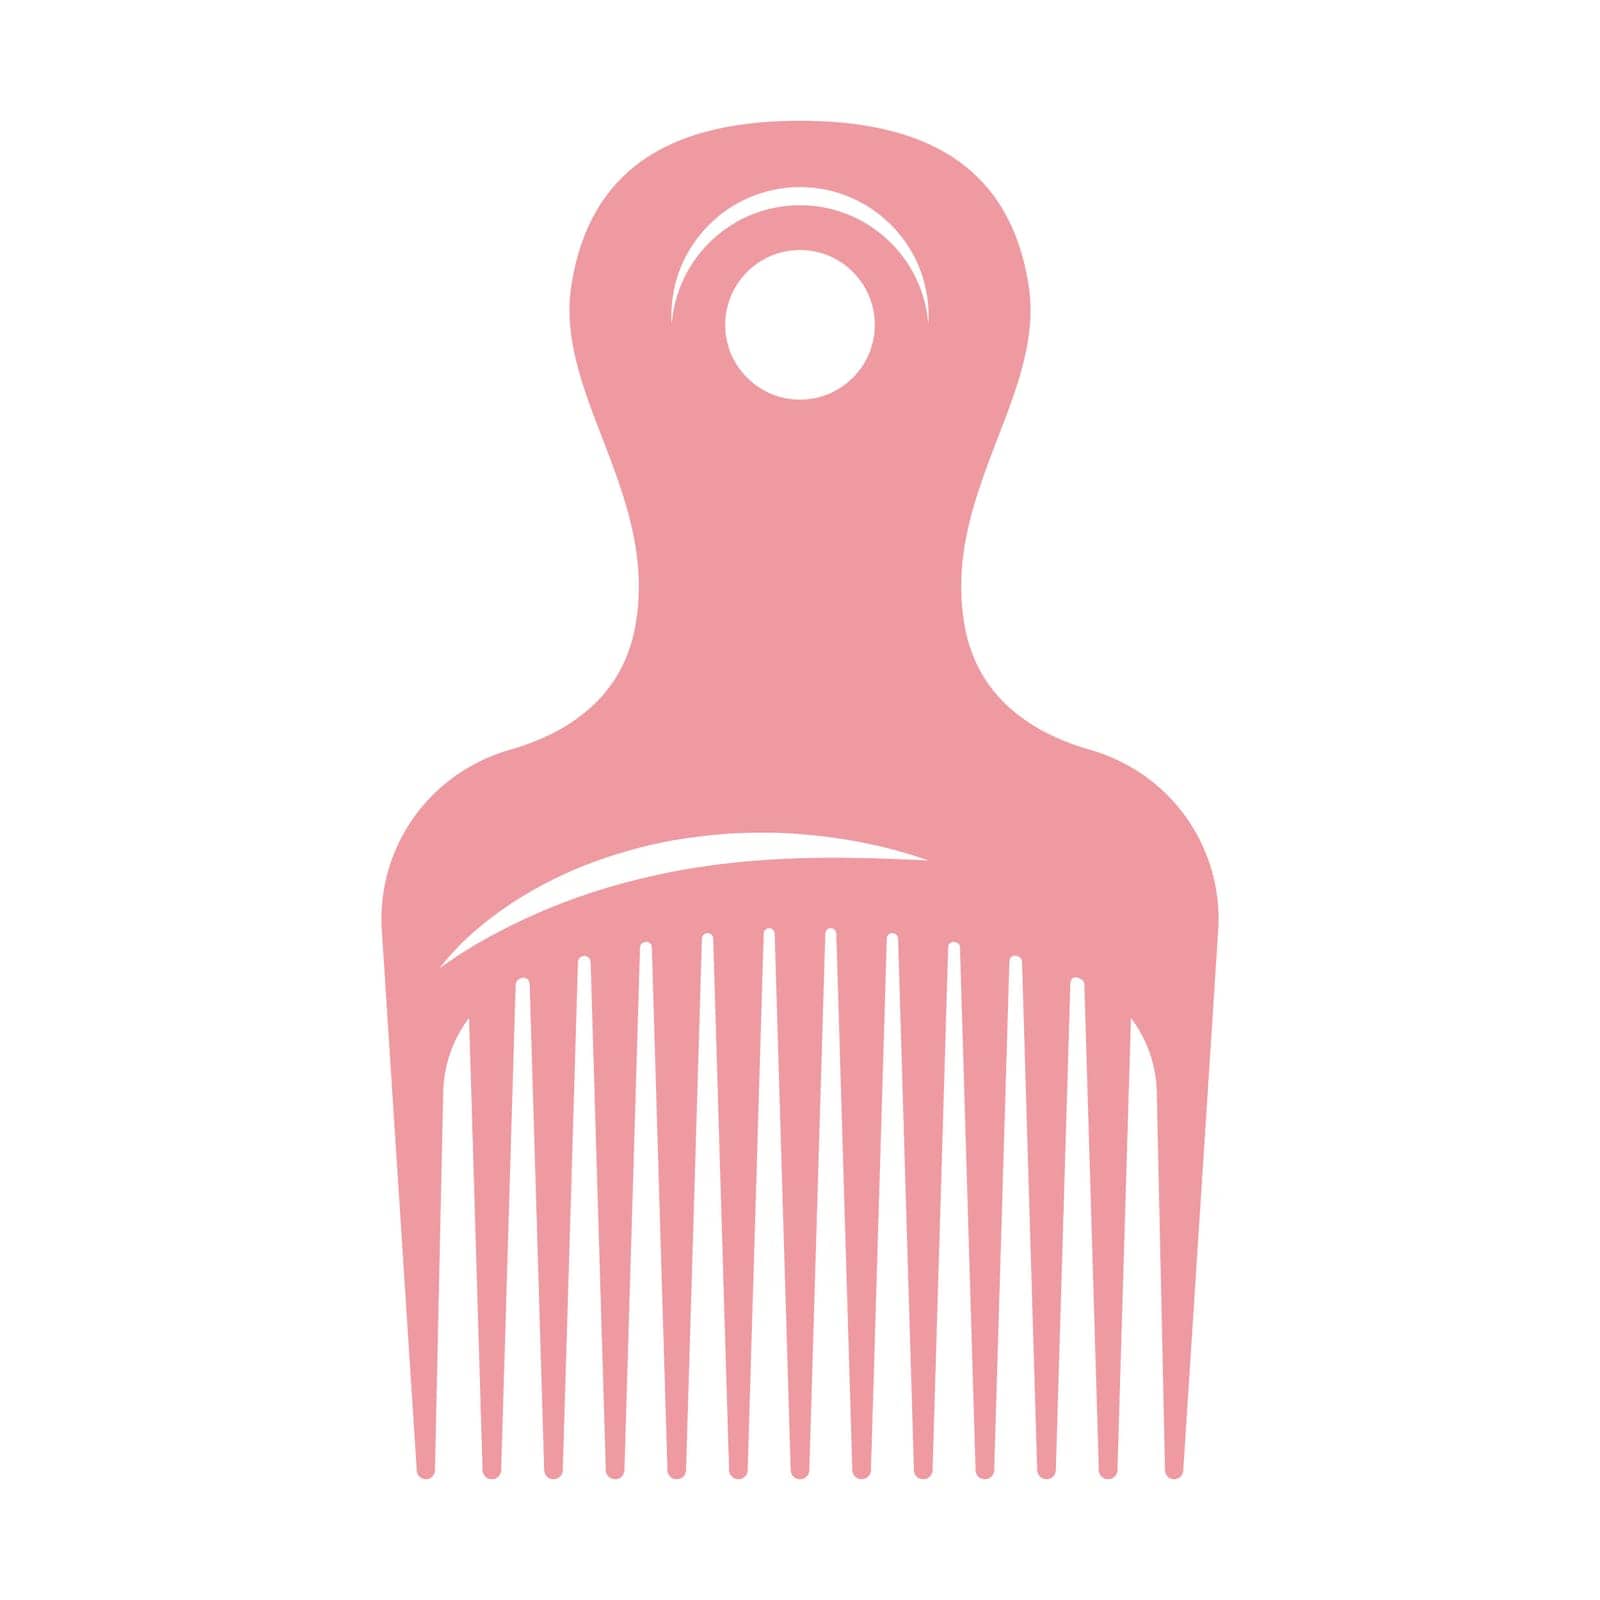 Comb logo icon design by bellaxbudhong3